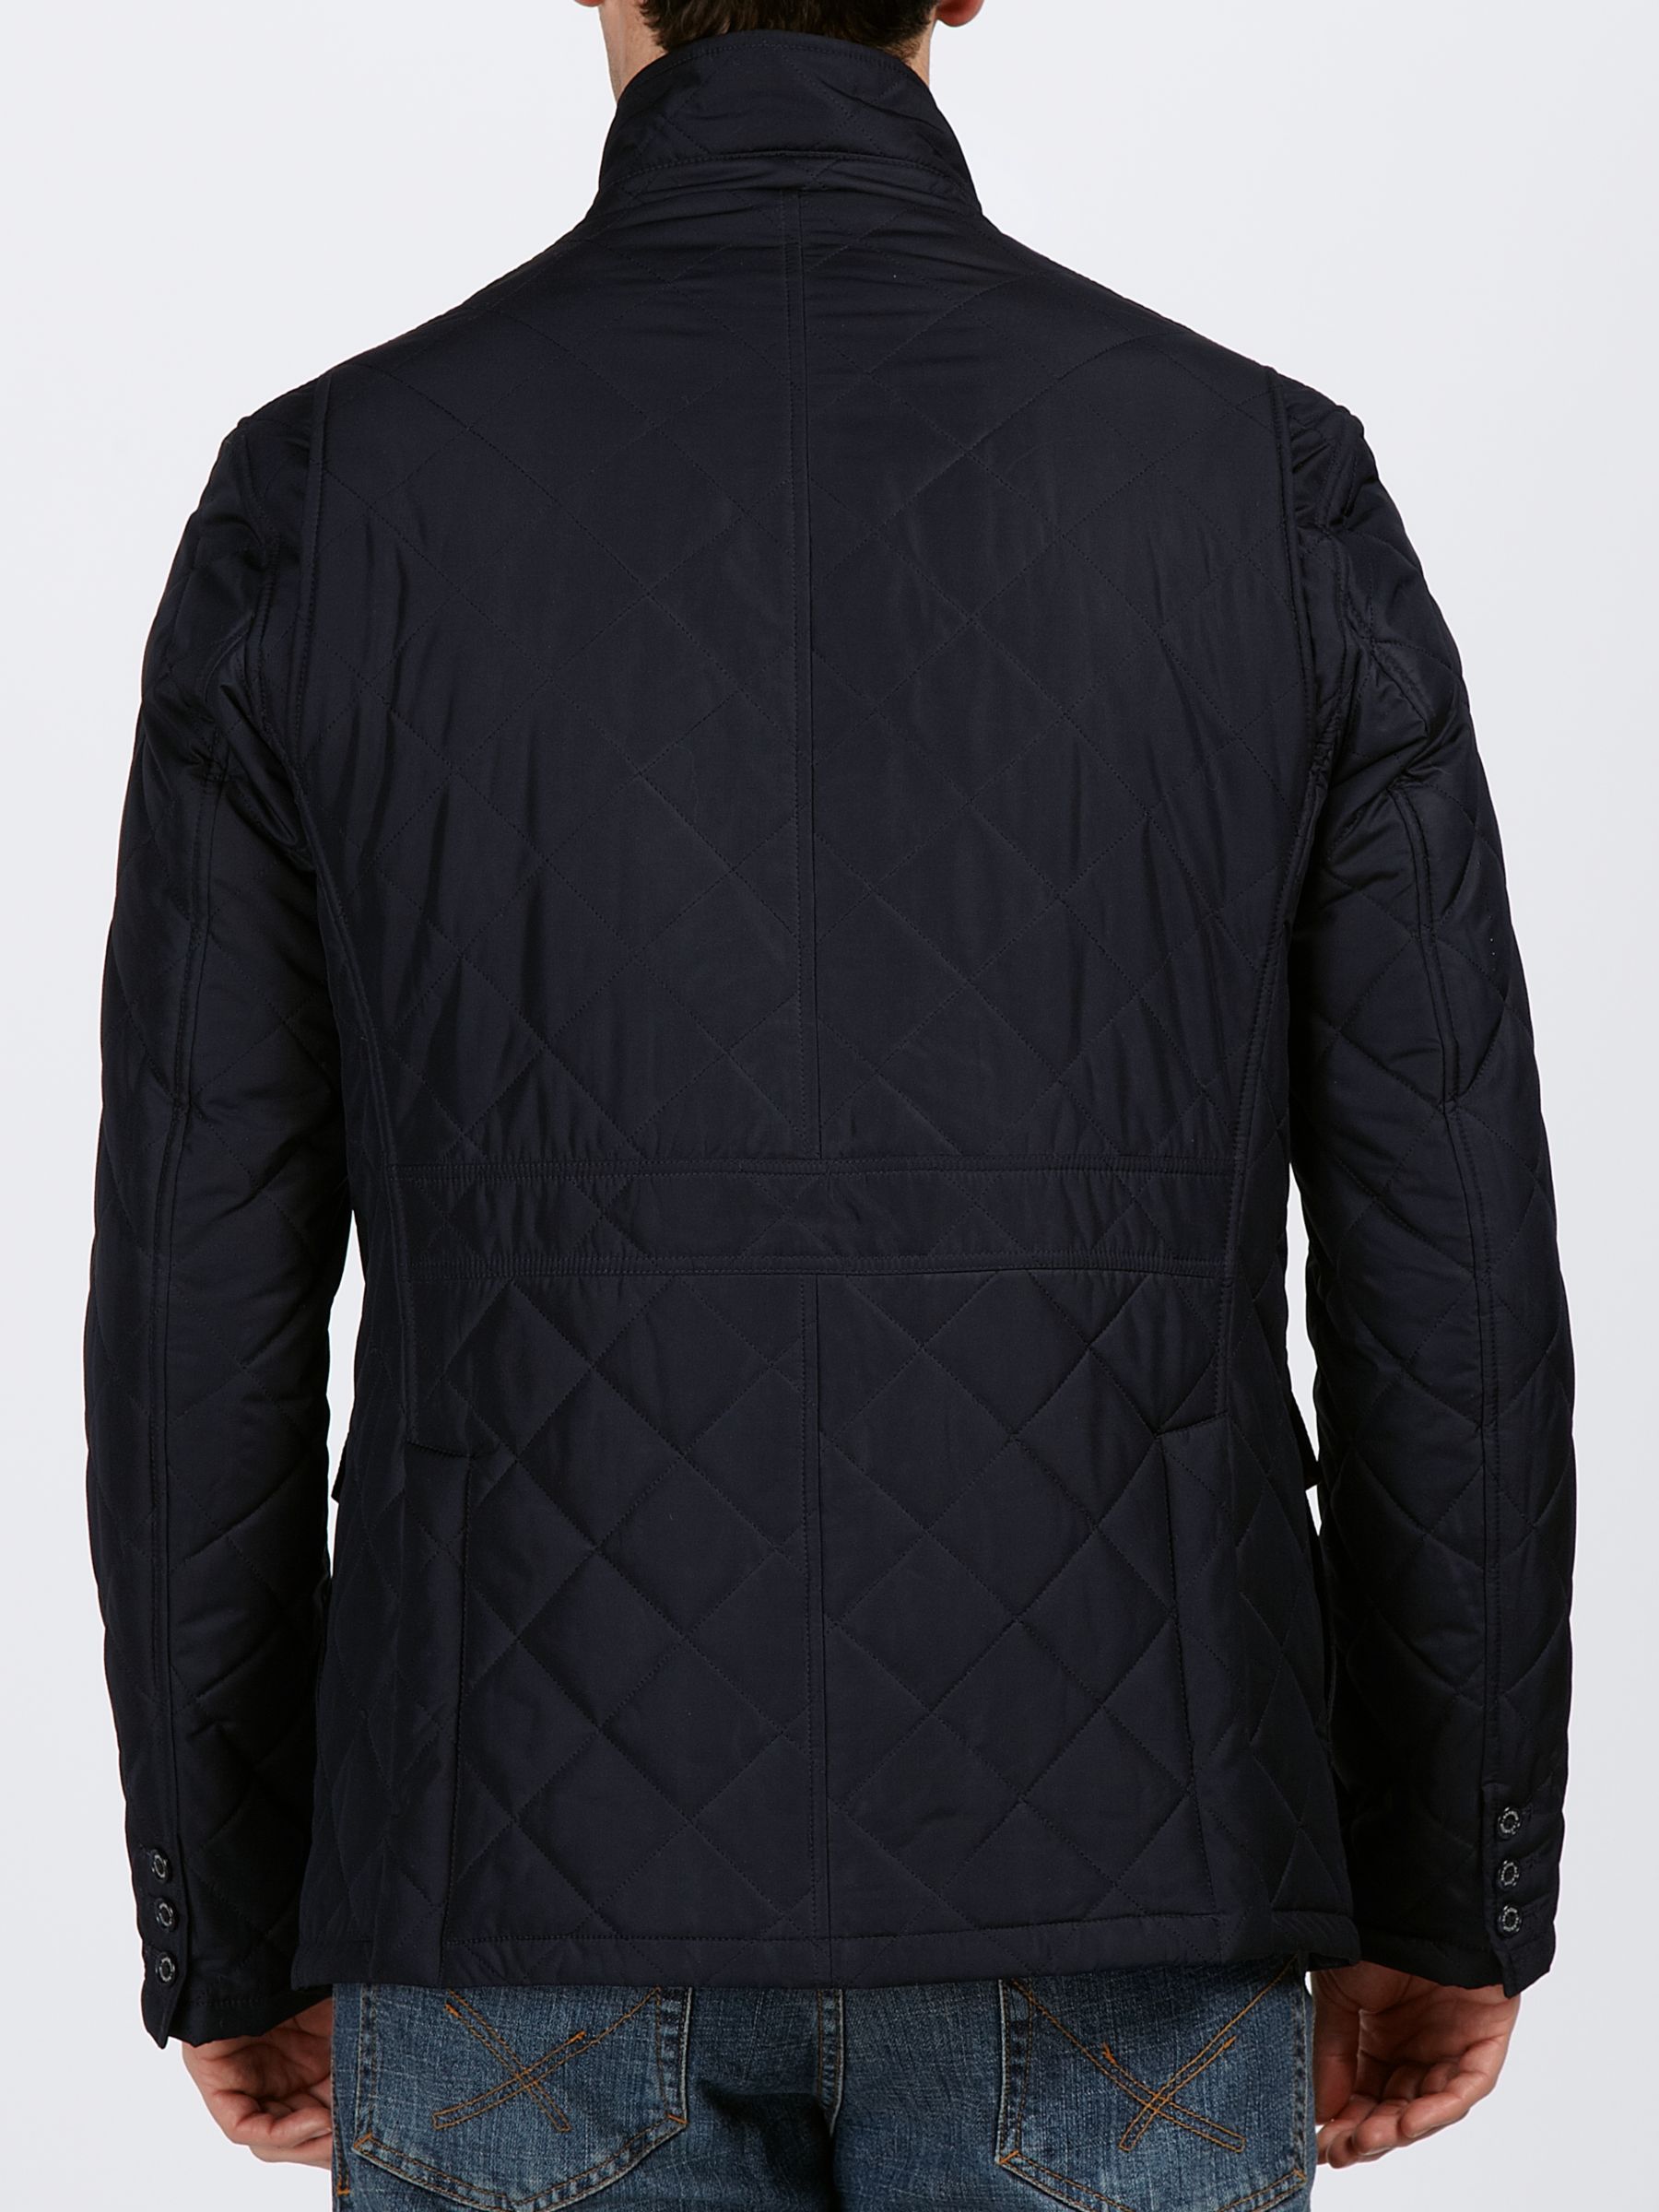 barbour quilted lutz jacket navy